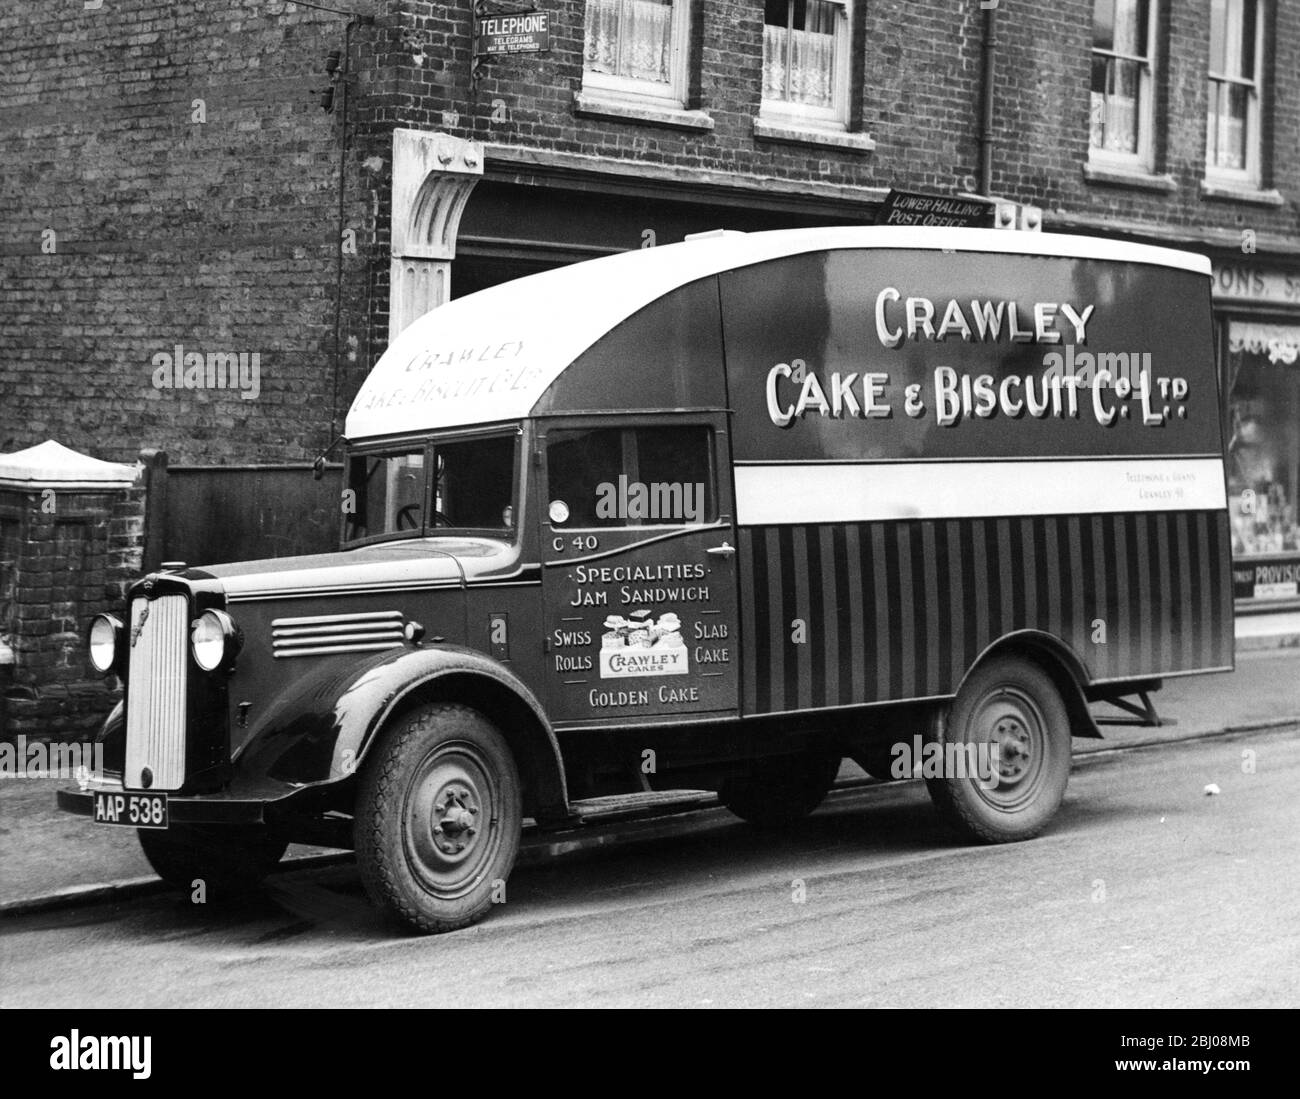 Crawley Cake and Biscuit Co Ltd delivery van Stock Photo